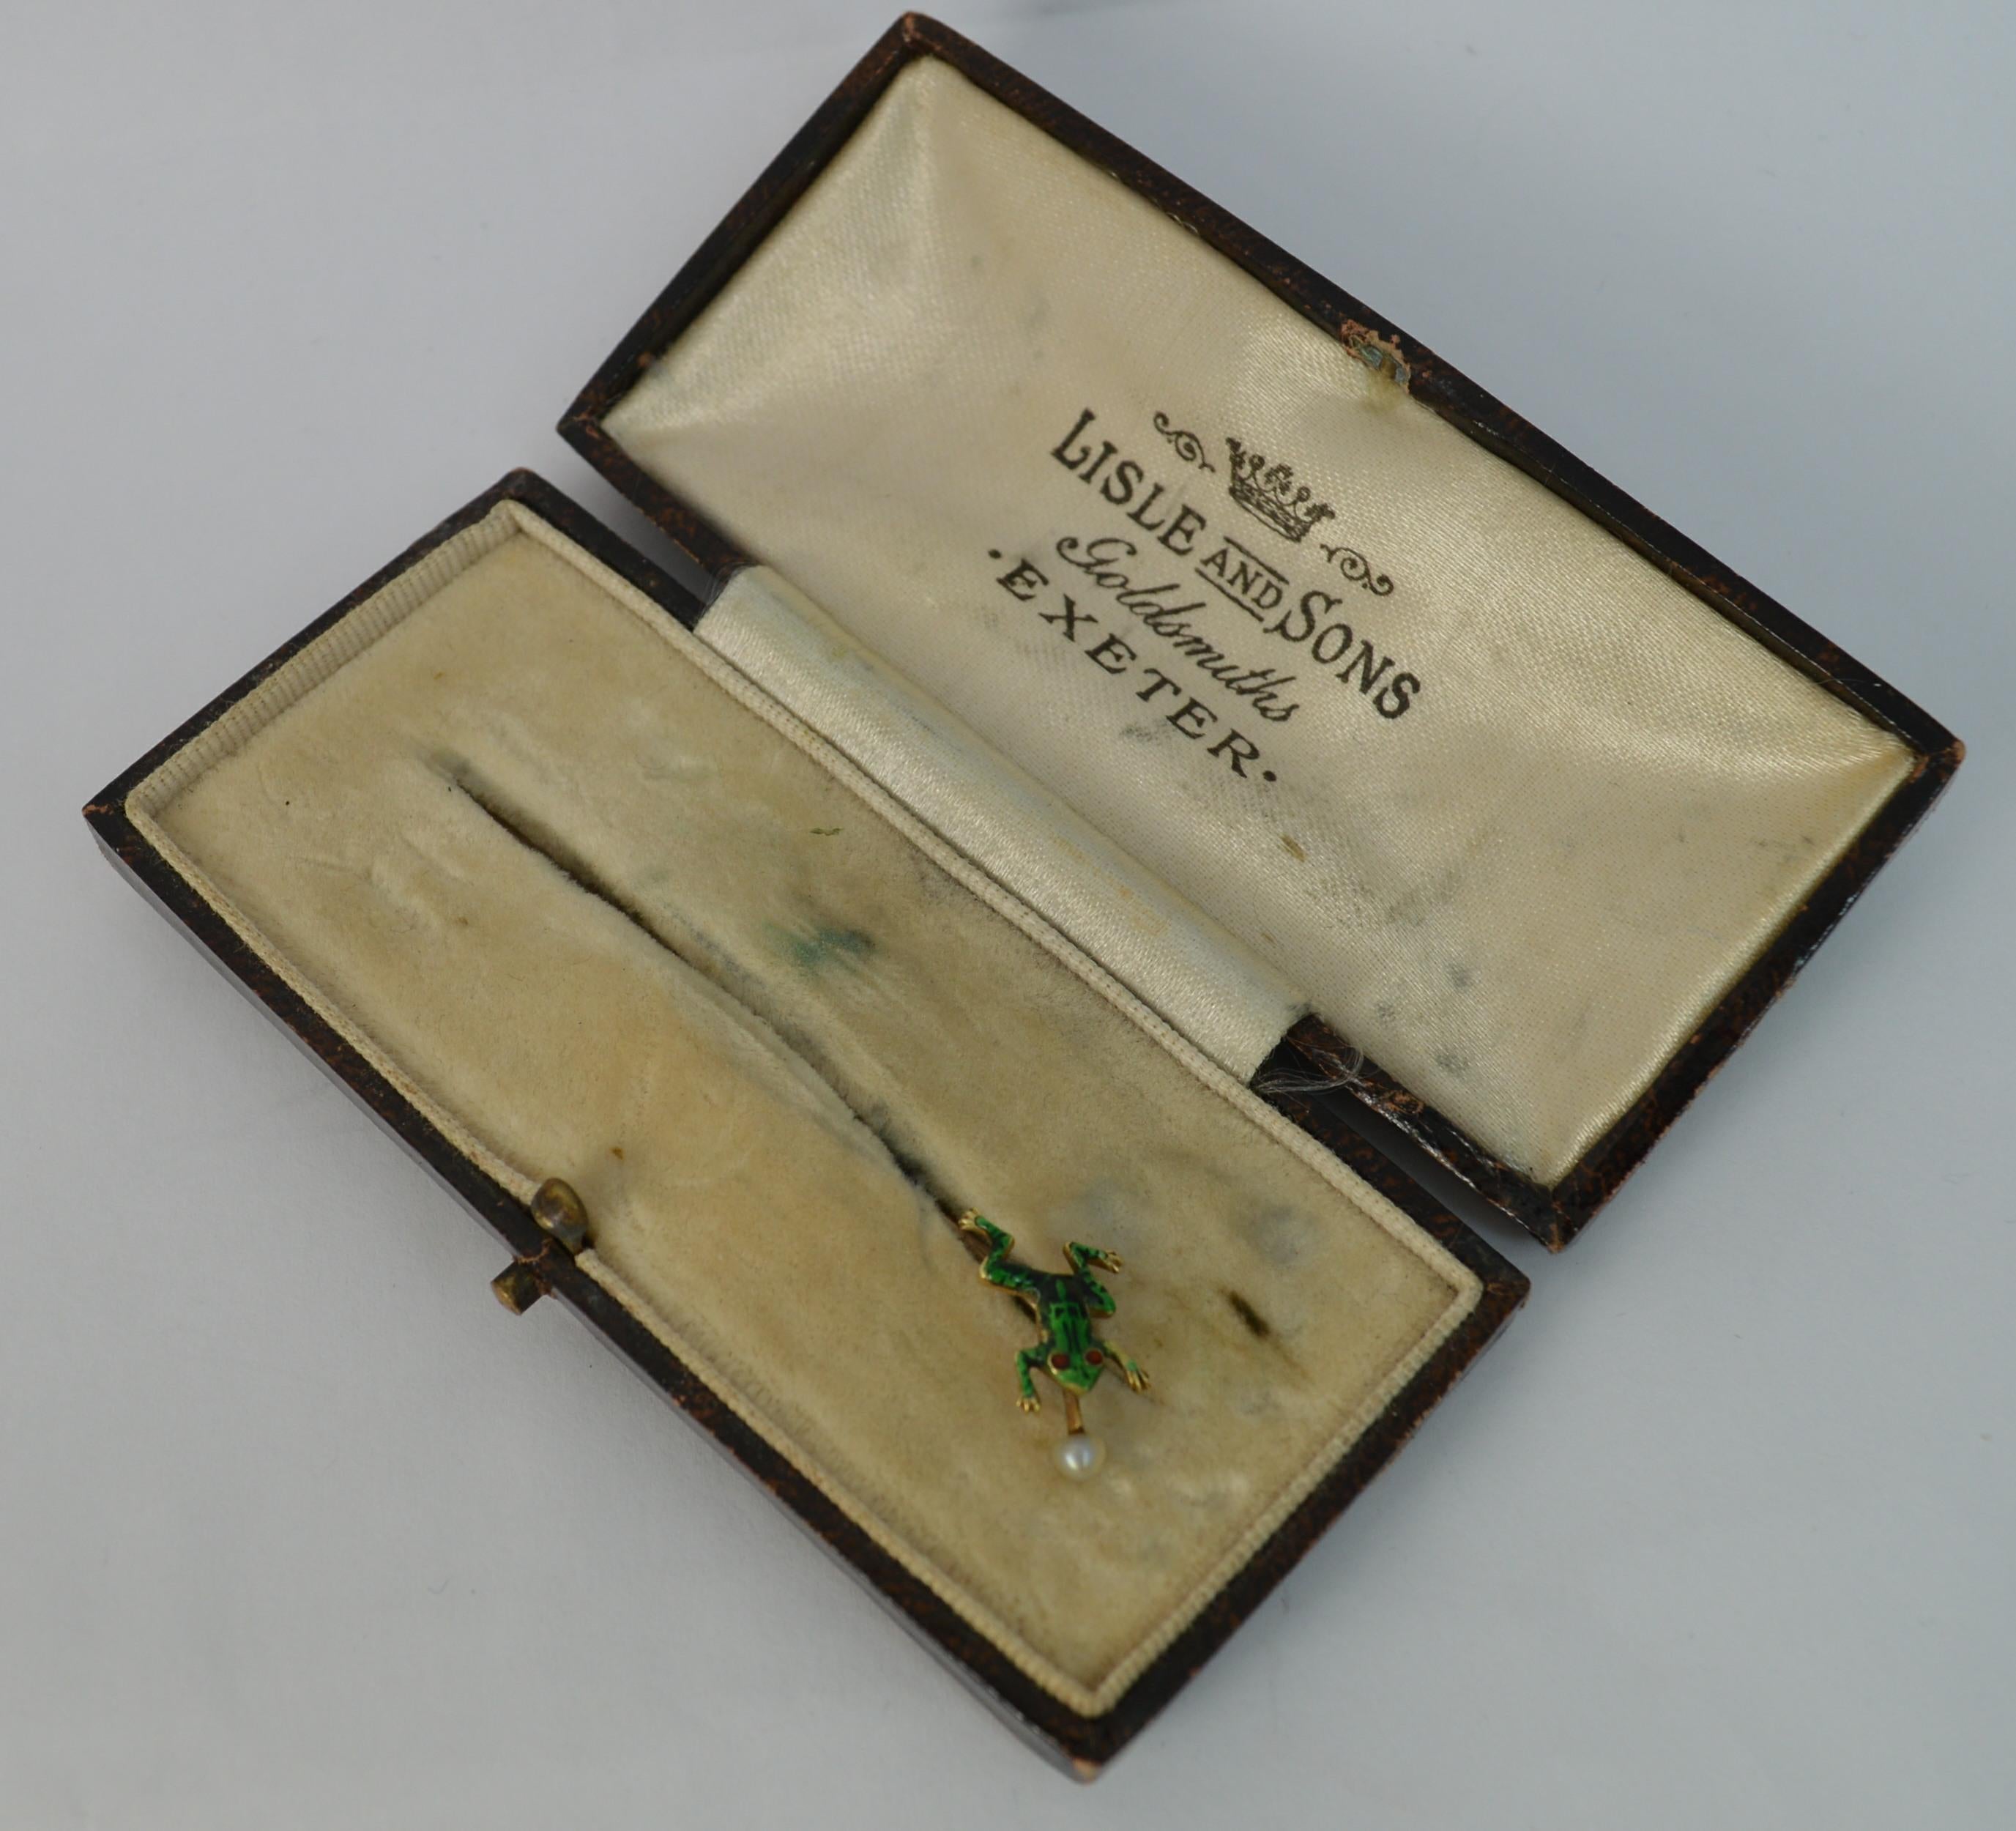 Art Deco Novelty Victorian Frog Enamel 9 Carat Gold Stick Pin in Antique Box Dated 1915